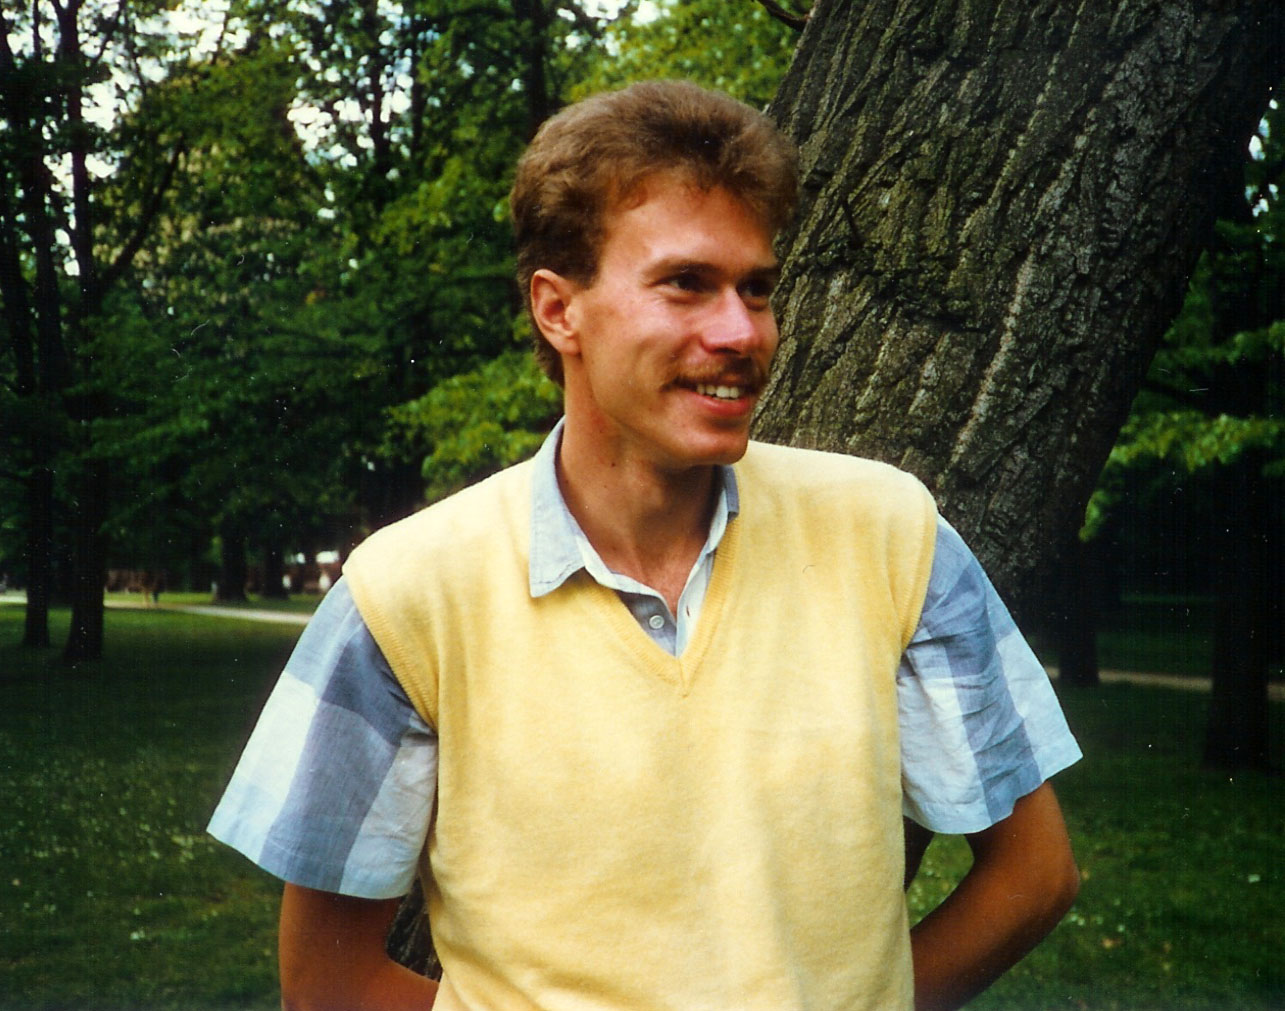 Snapshot in Hannover in the 1990s. 